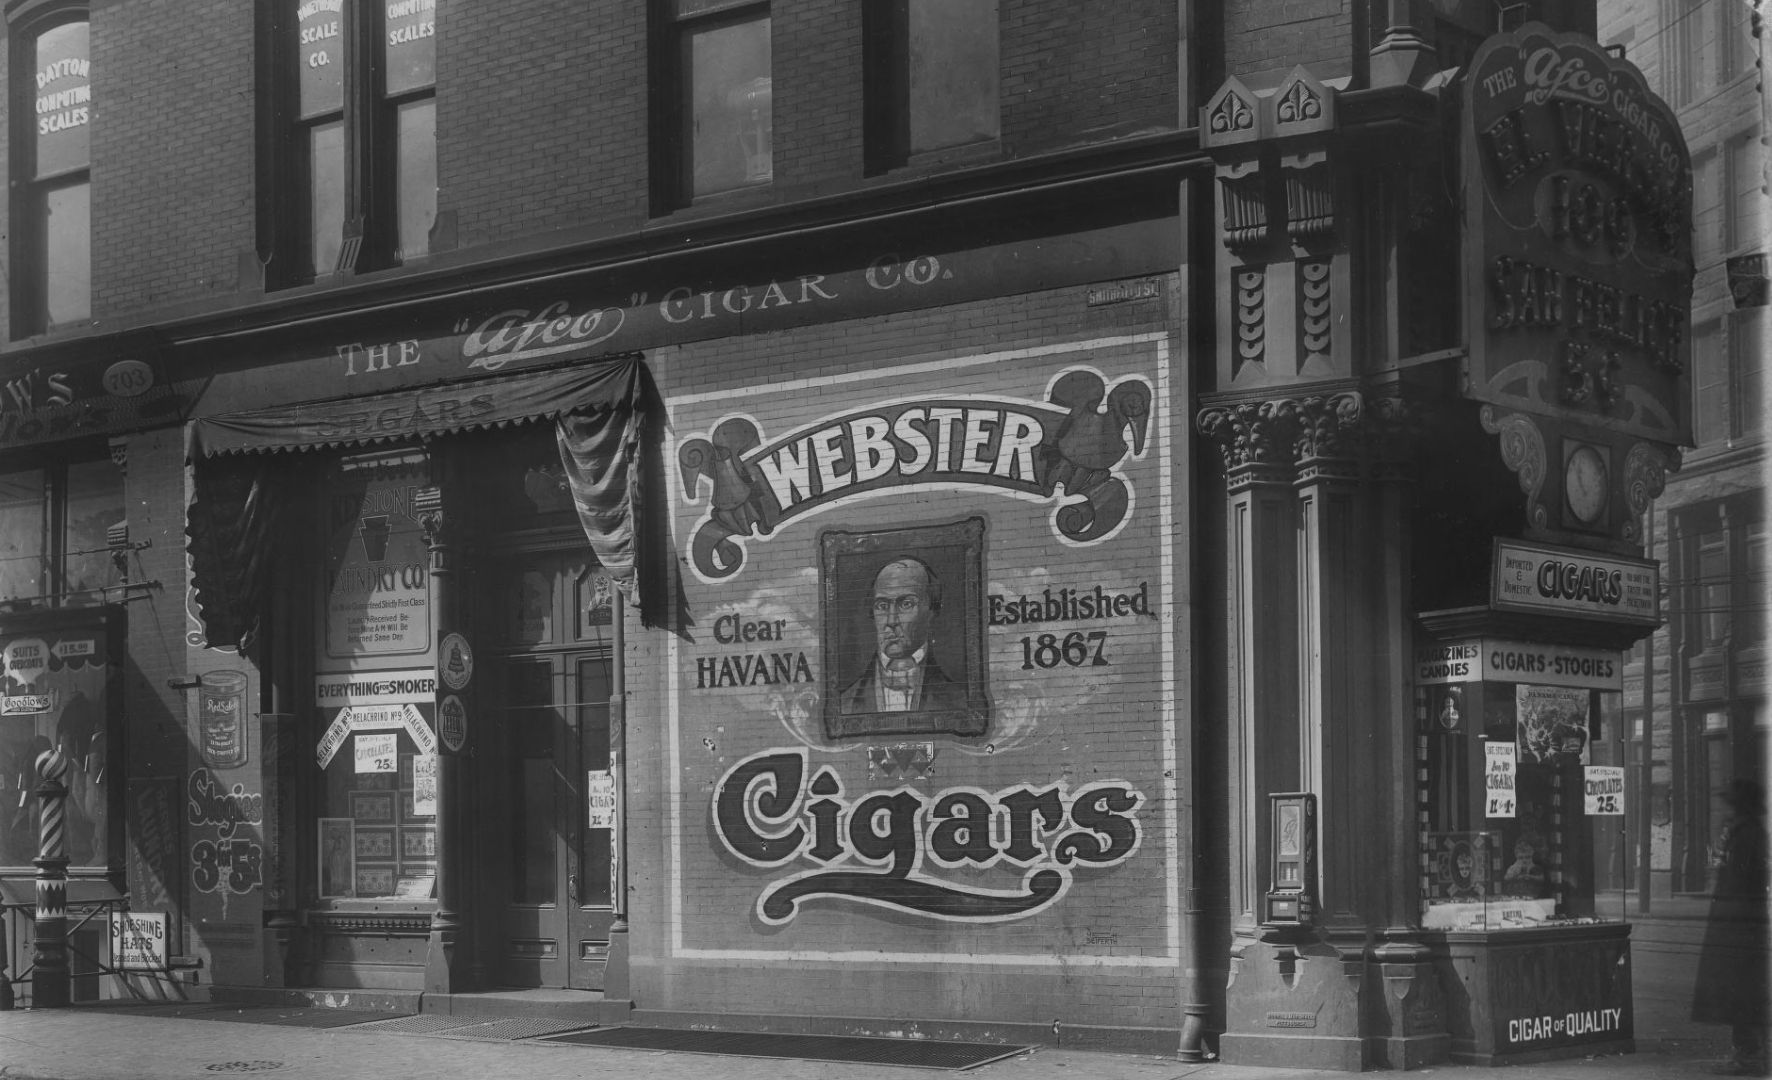 Cigar shop with a medley of signage, including a painted wall, fascia, illuminated piece, window displays and more.